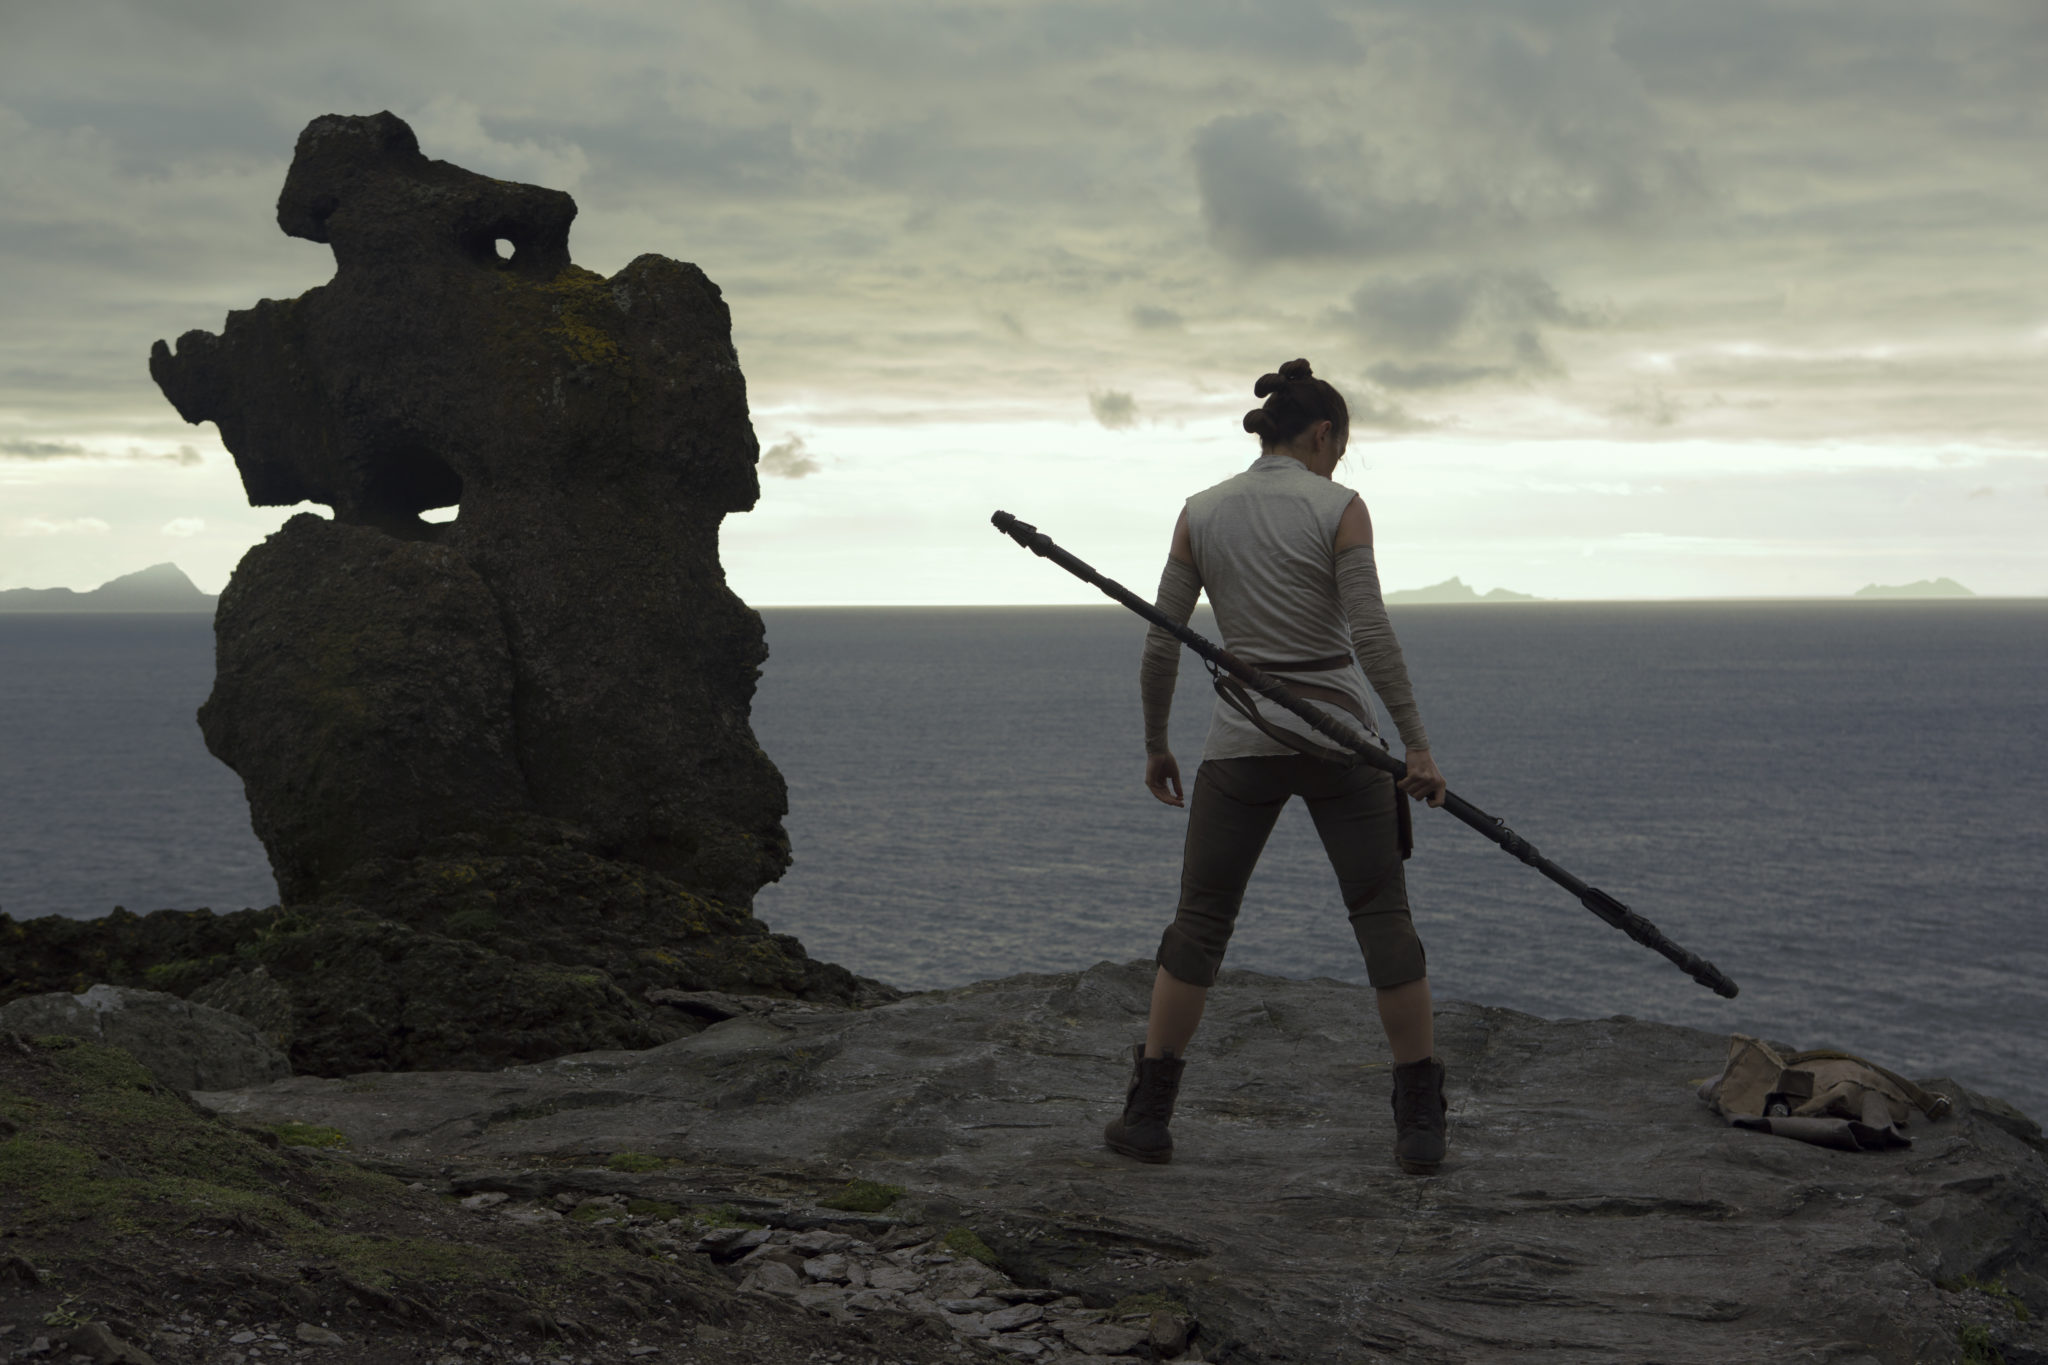 ‘Star Wars: The Last Jedi’ Opening Weekend Box Office Projections